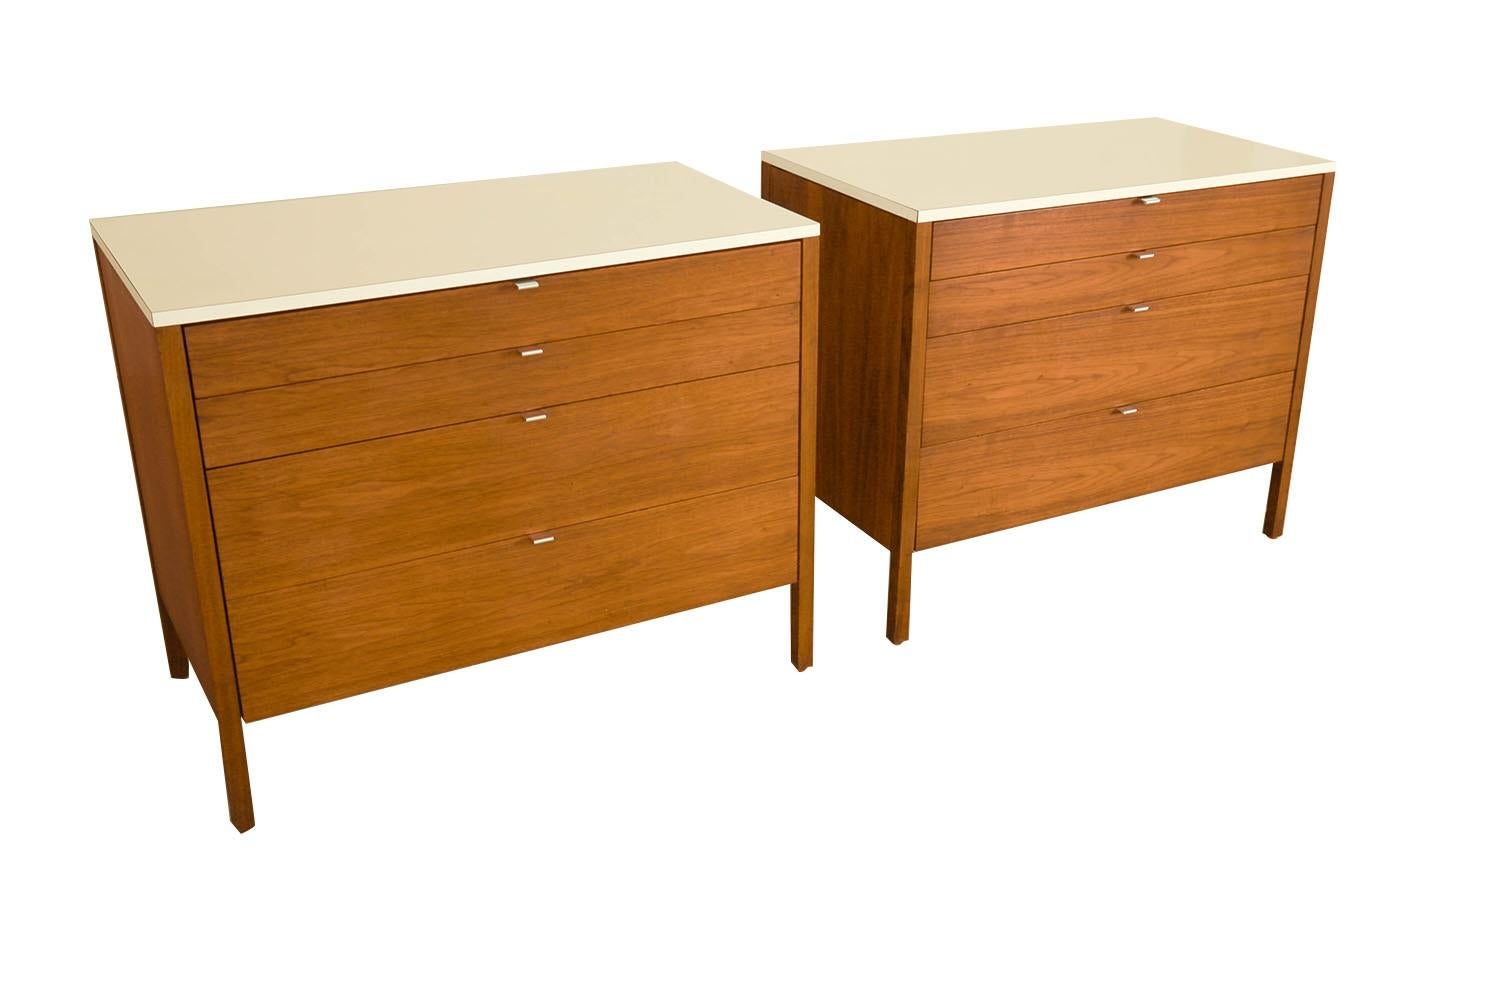 Remarkably iconic rare pair of walnut Mid-Century cabinets/ dressers by Florence Knoll, for Knoll inc., ca. 1960's. A beautiful example of Mid-Century craftsmanship. Expertly crafted, these absolute jewels remain in clean vintage condition. Each